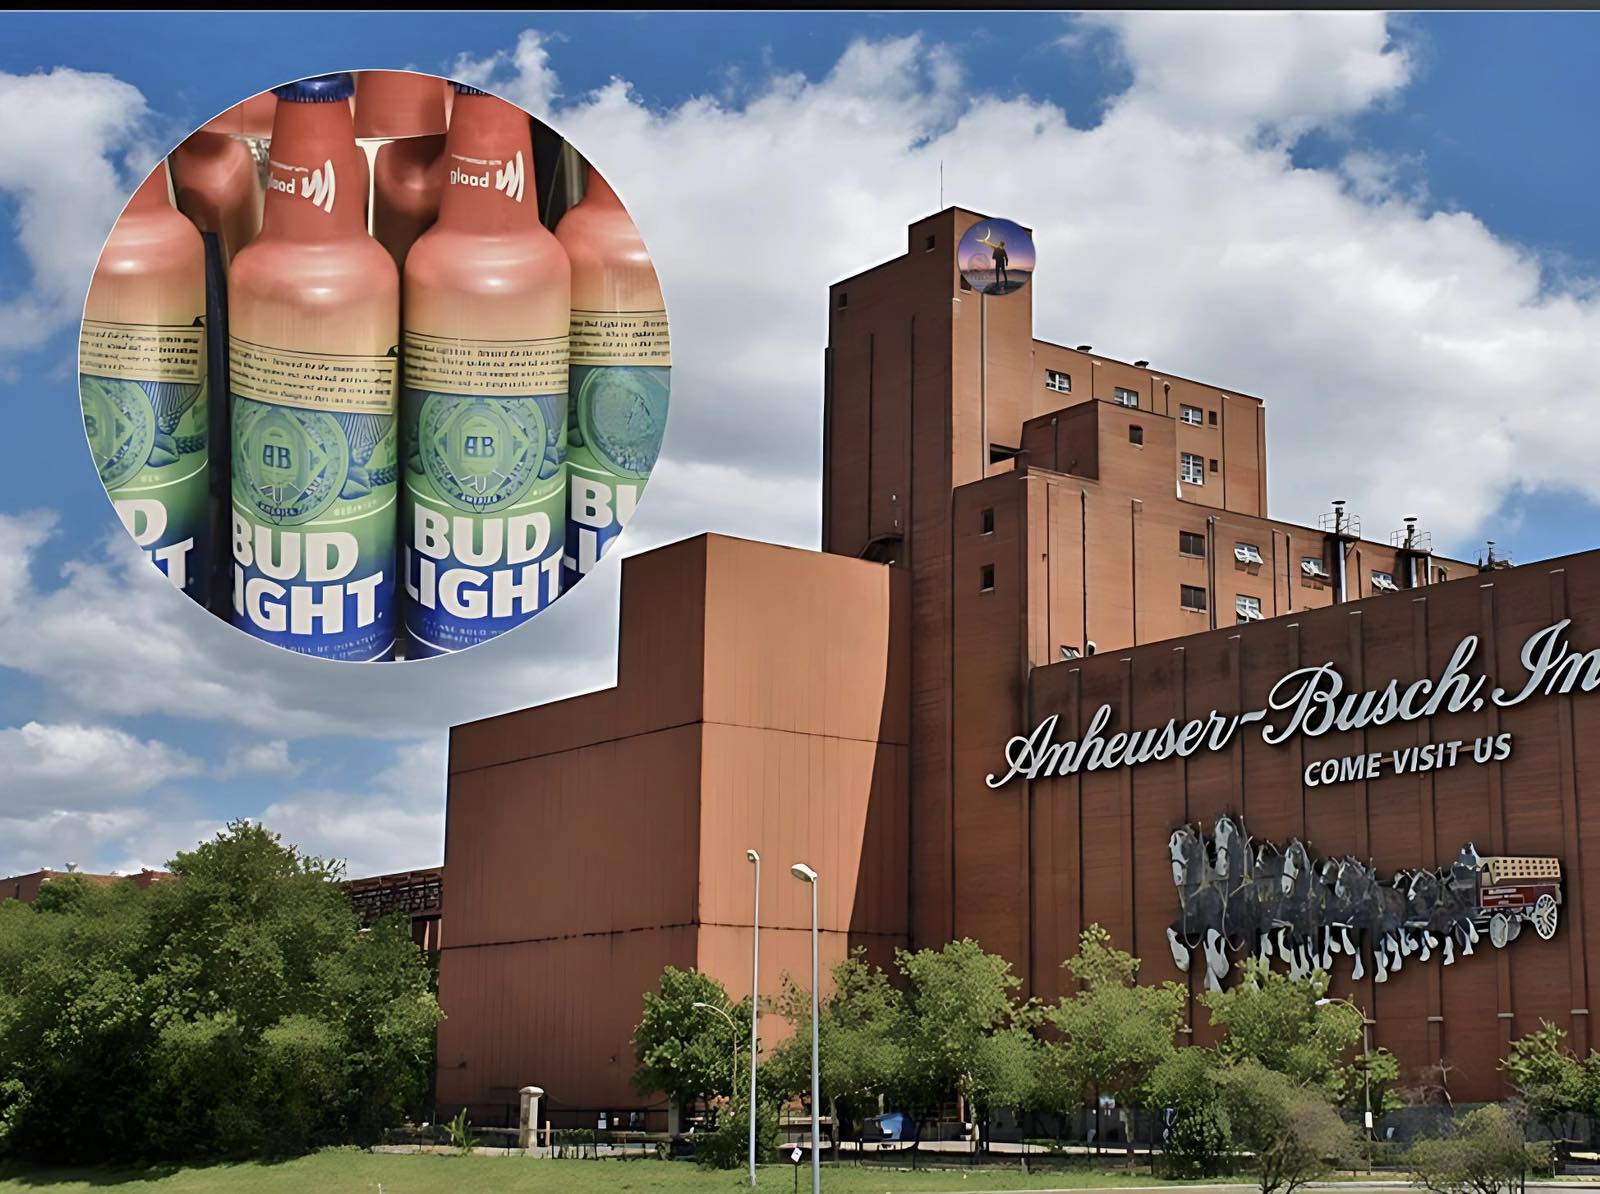 Anheuser-Busch Announces Discontinuation and Re-Branding of Bud Light: “We Can’t Save It”